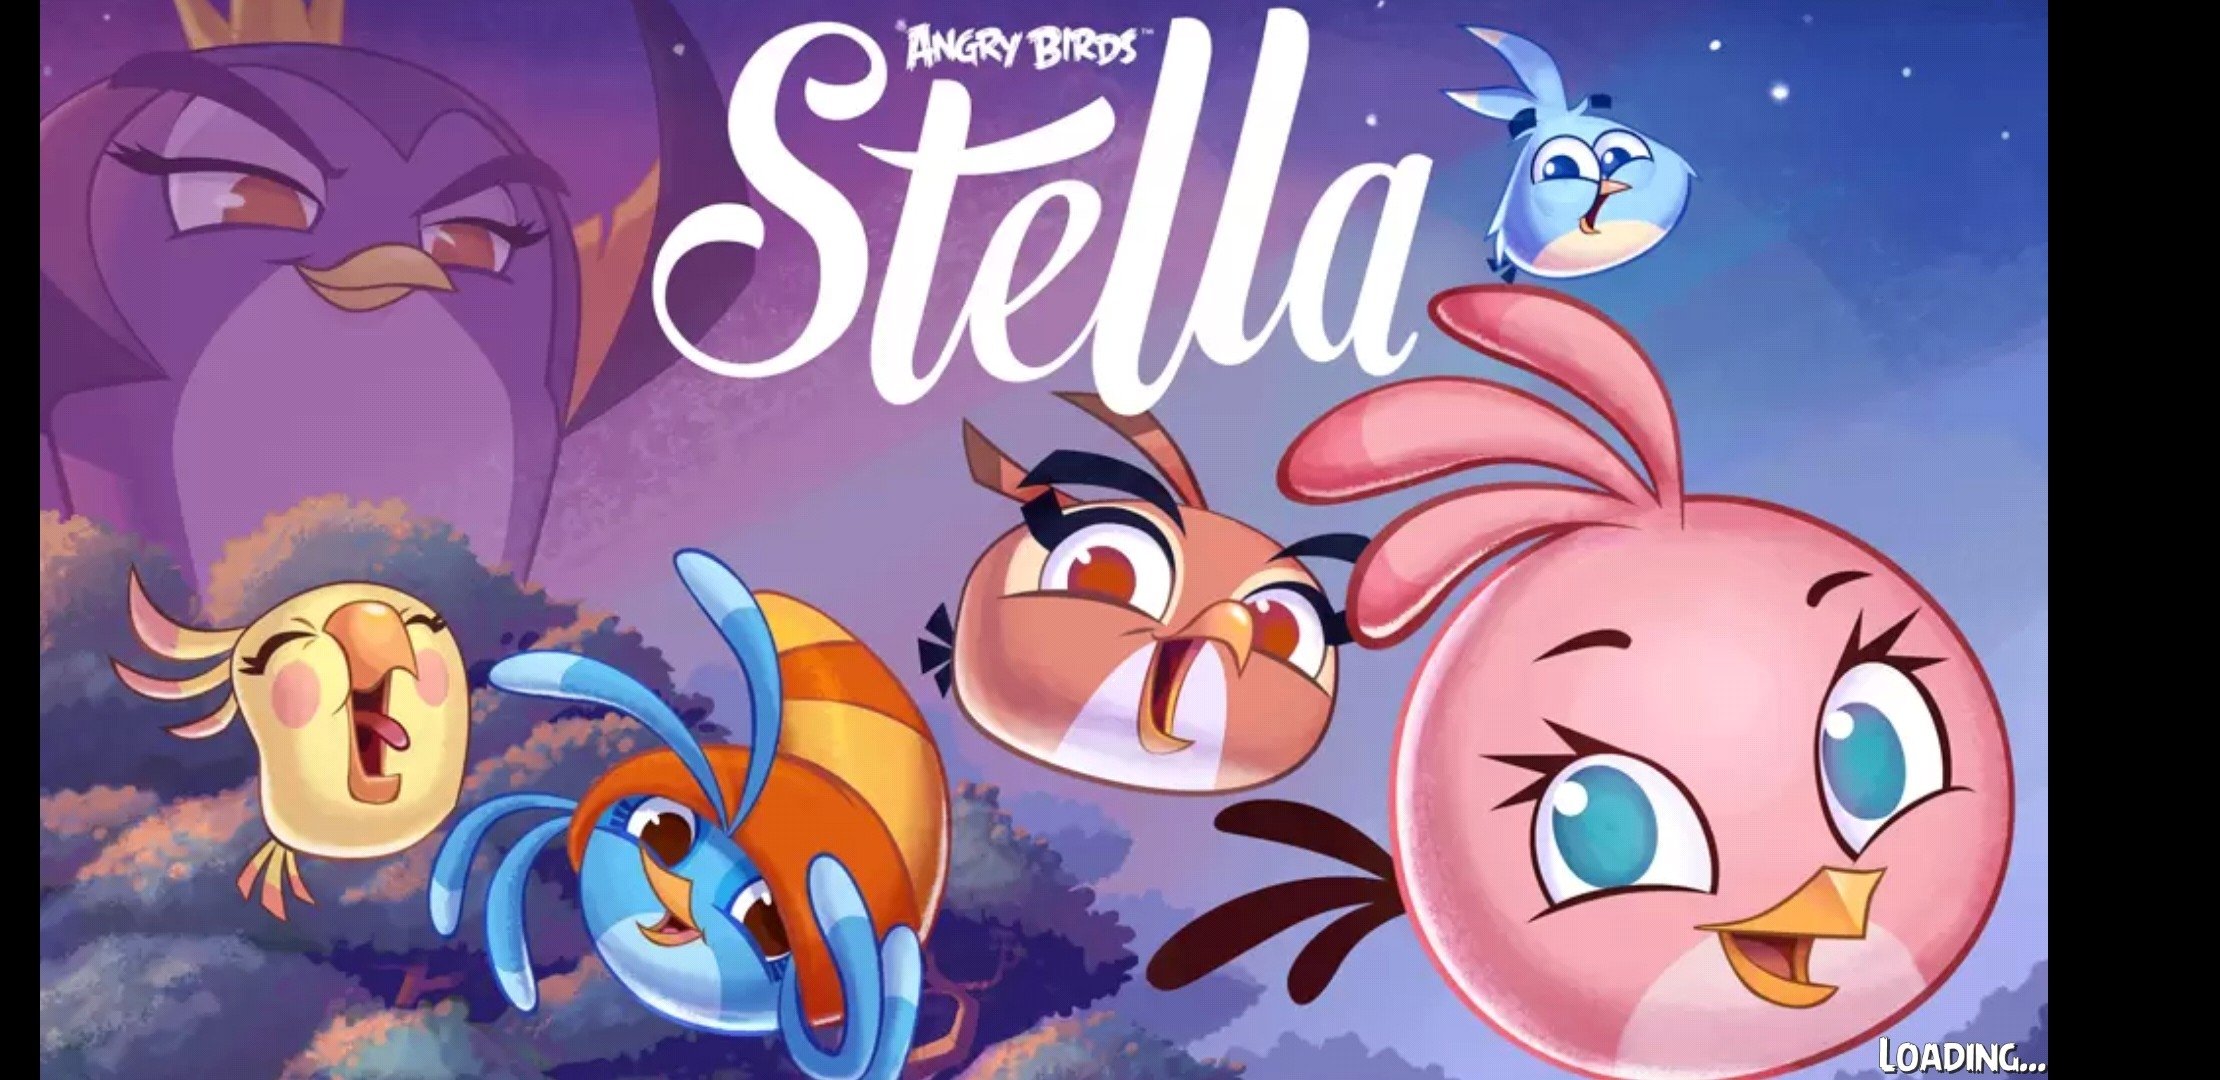 angry birds stella game free download for pc full version windows 7